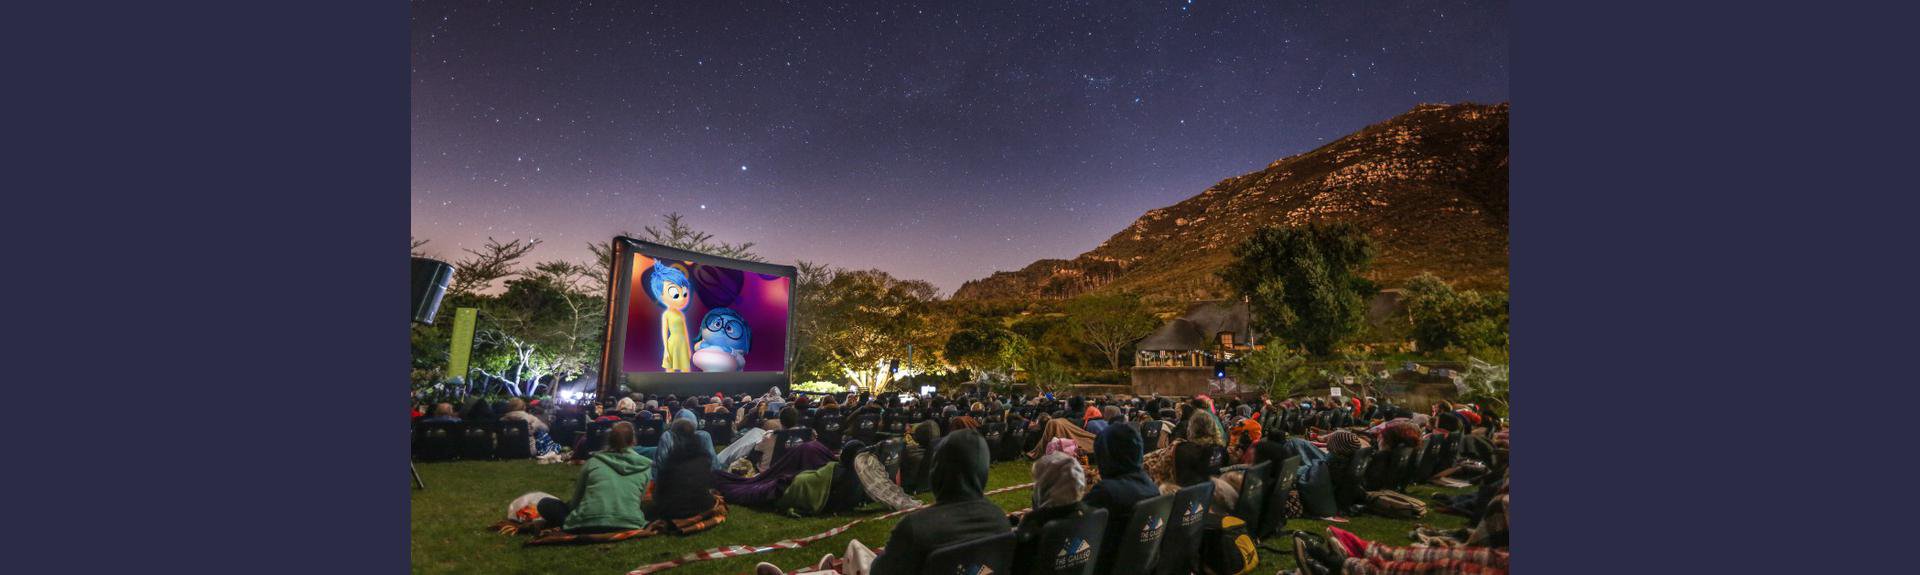 Outdoor movies: Inside Out